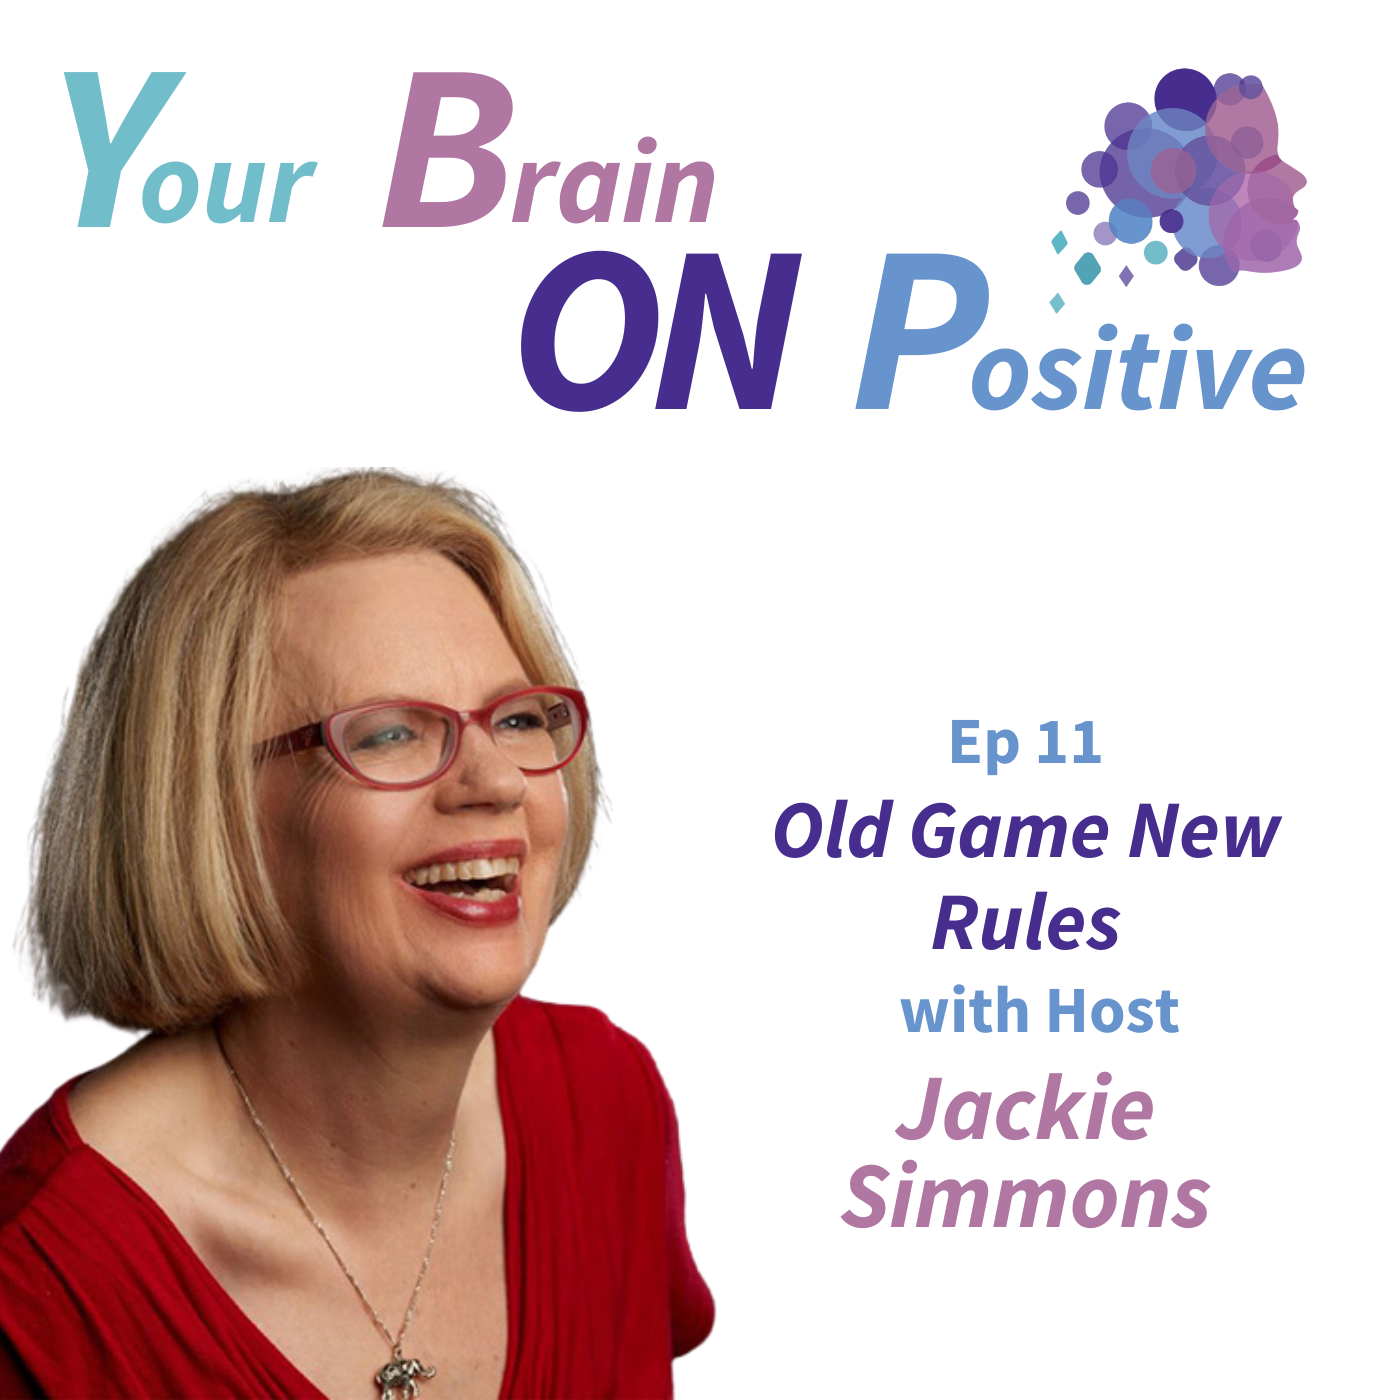 Old Game New Rules with Jackie Simmons